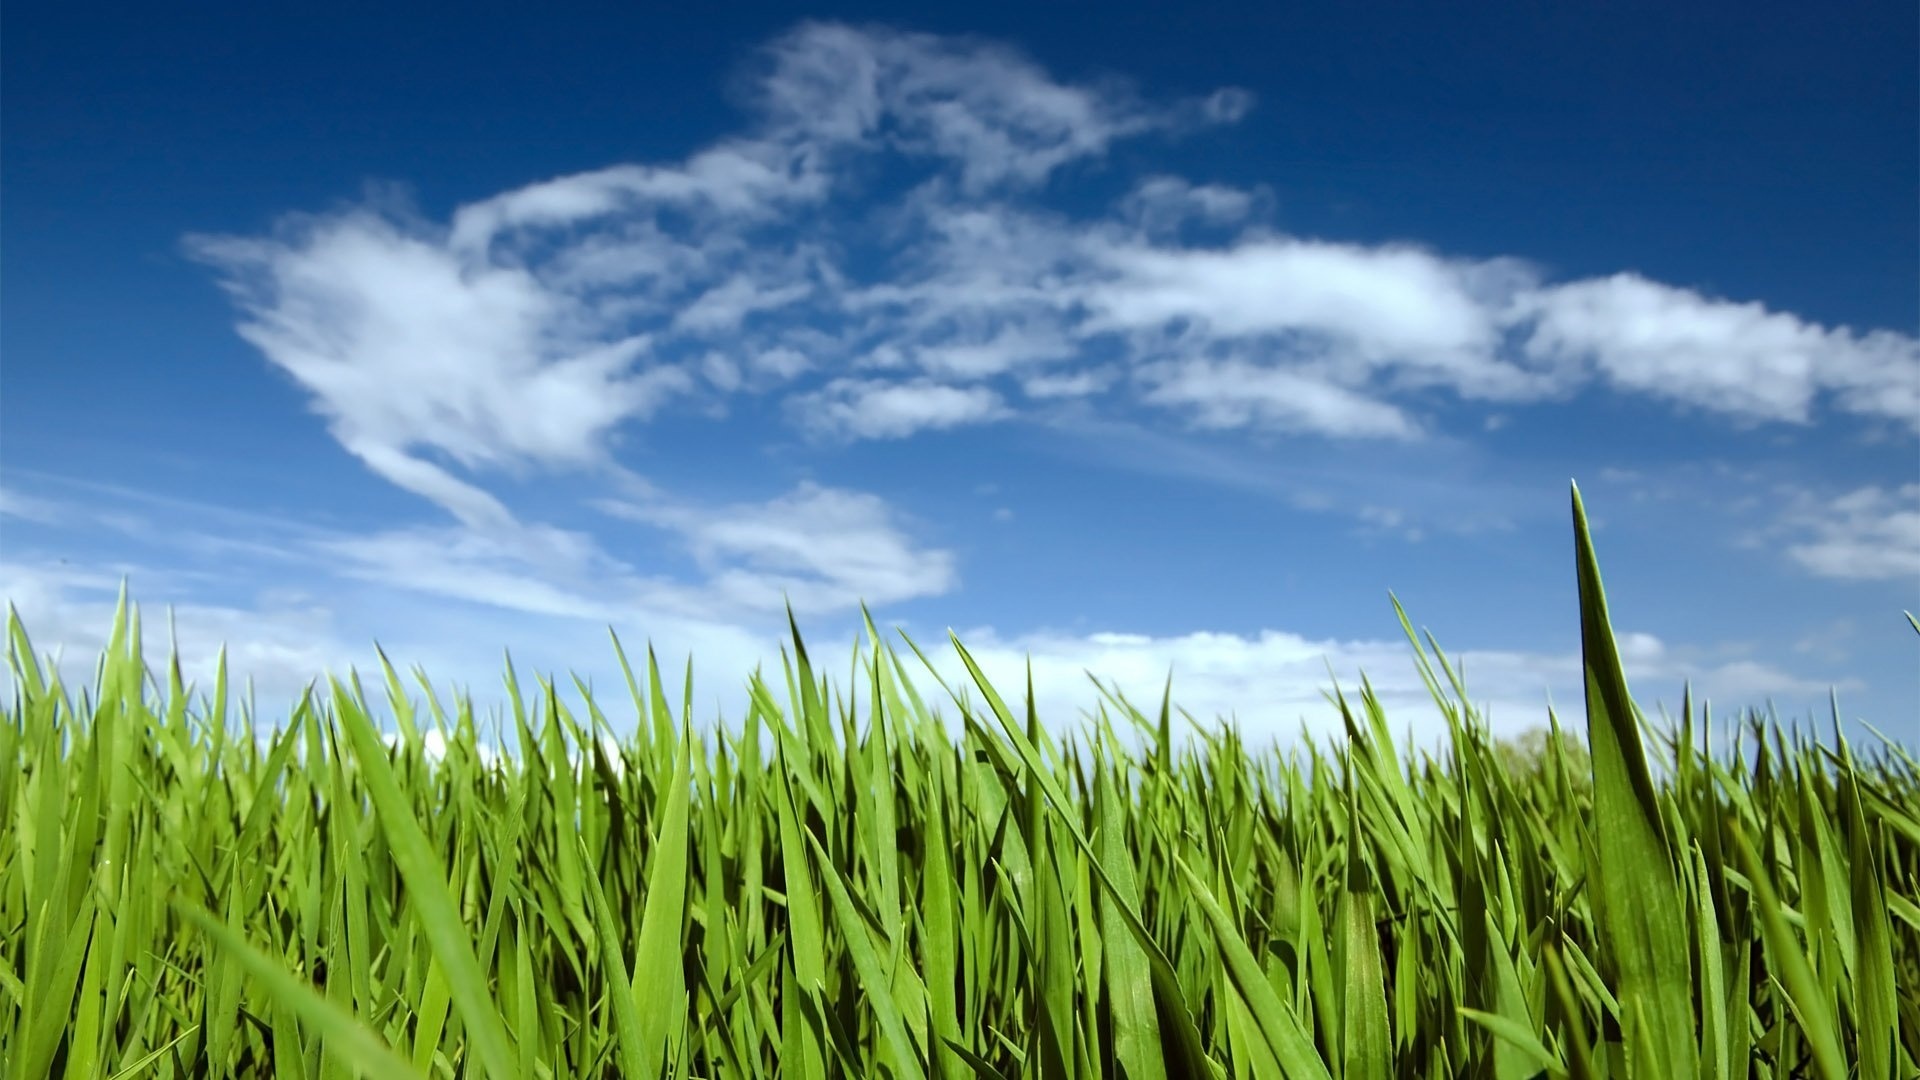 Sky And Grass Background